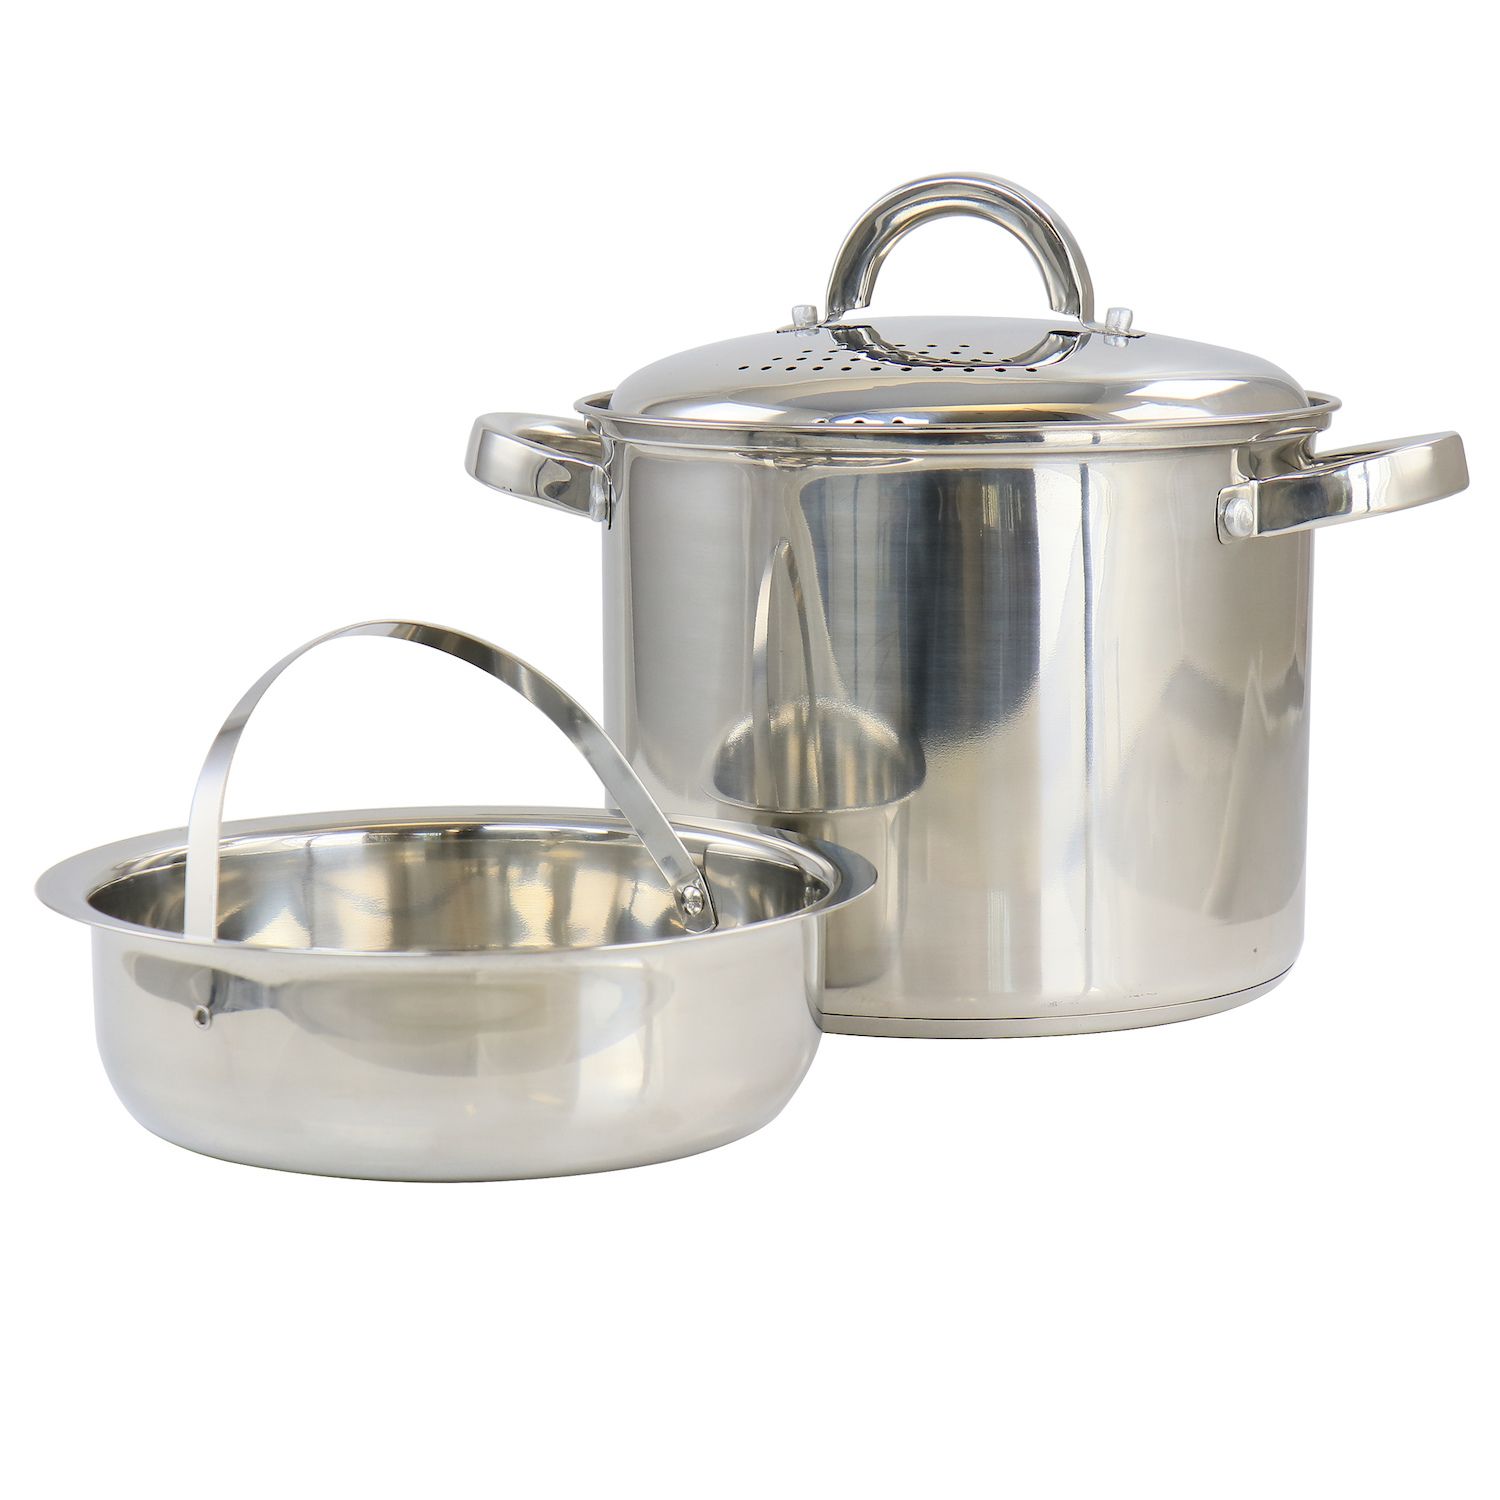 3pcs/set Pressure Cooker Accessories Stainless Steel Steam Basket With Egg  Steamer Rack, Divider Fo